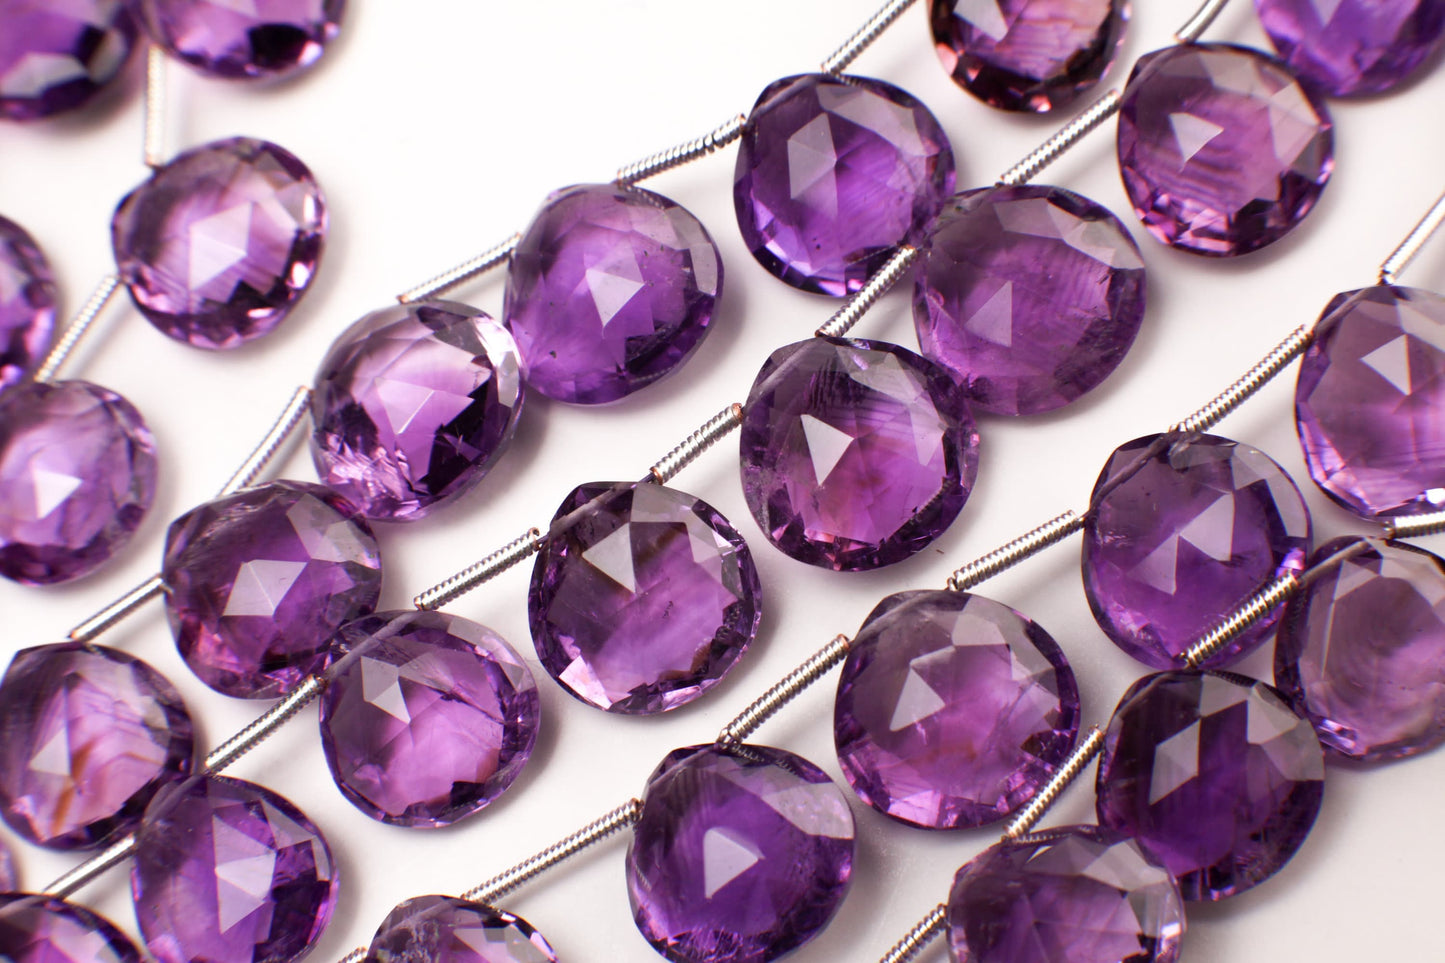 Genuine Amethyst cut Faceted AAA clear gem quality Briolette, Graduated Faceted Heart Teardrop 10.5-14mm Amethyst drops.